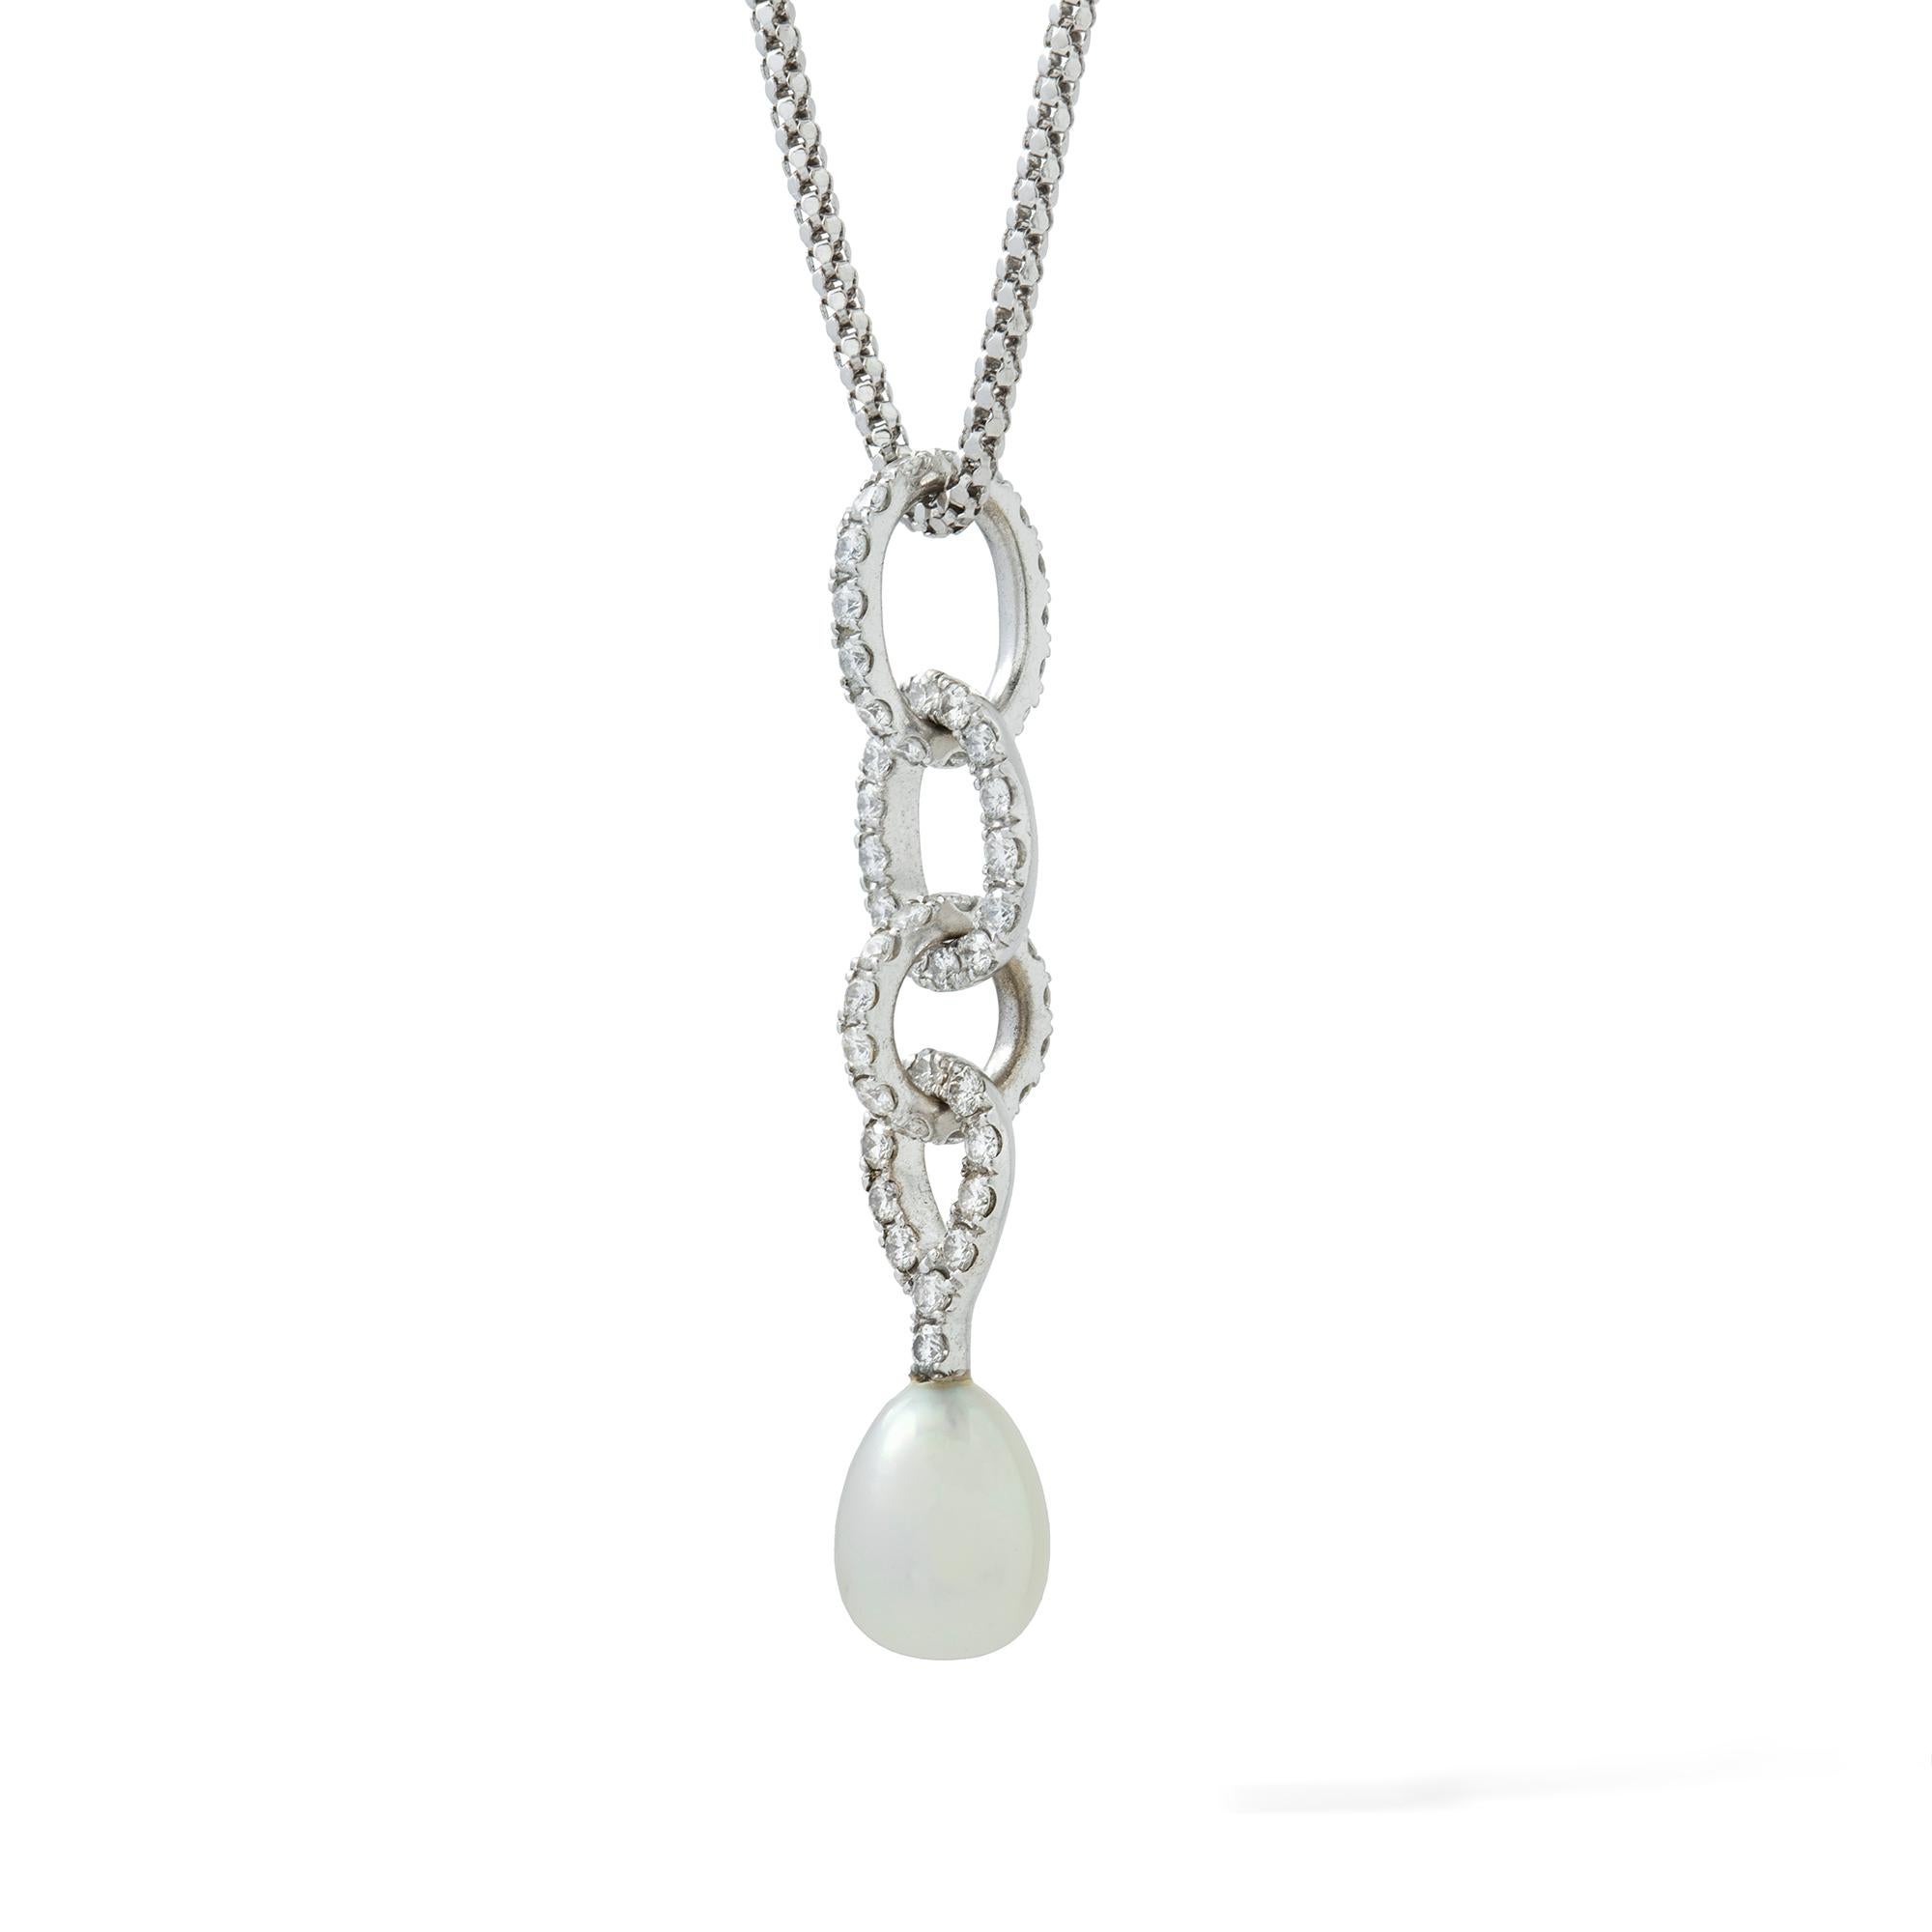 A cultured  pearl and diamond pendant, the pear-shaped cultured pearl, measuring 0.8 x 0.6 mm, suspended by a diamond-set pear-shaped pendant loop, with three diamond-set circles, the diamonds weighing approximately a total of 0.50 carats, all set